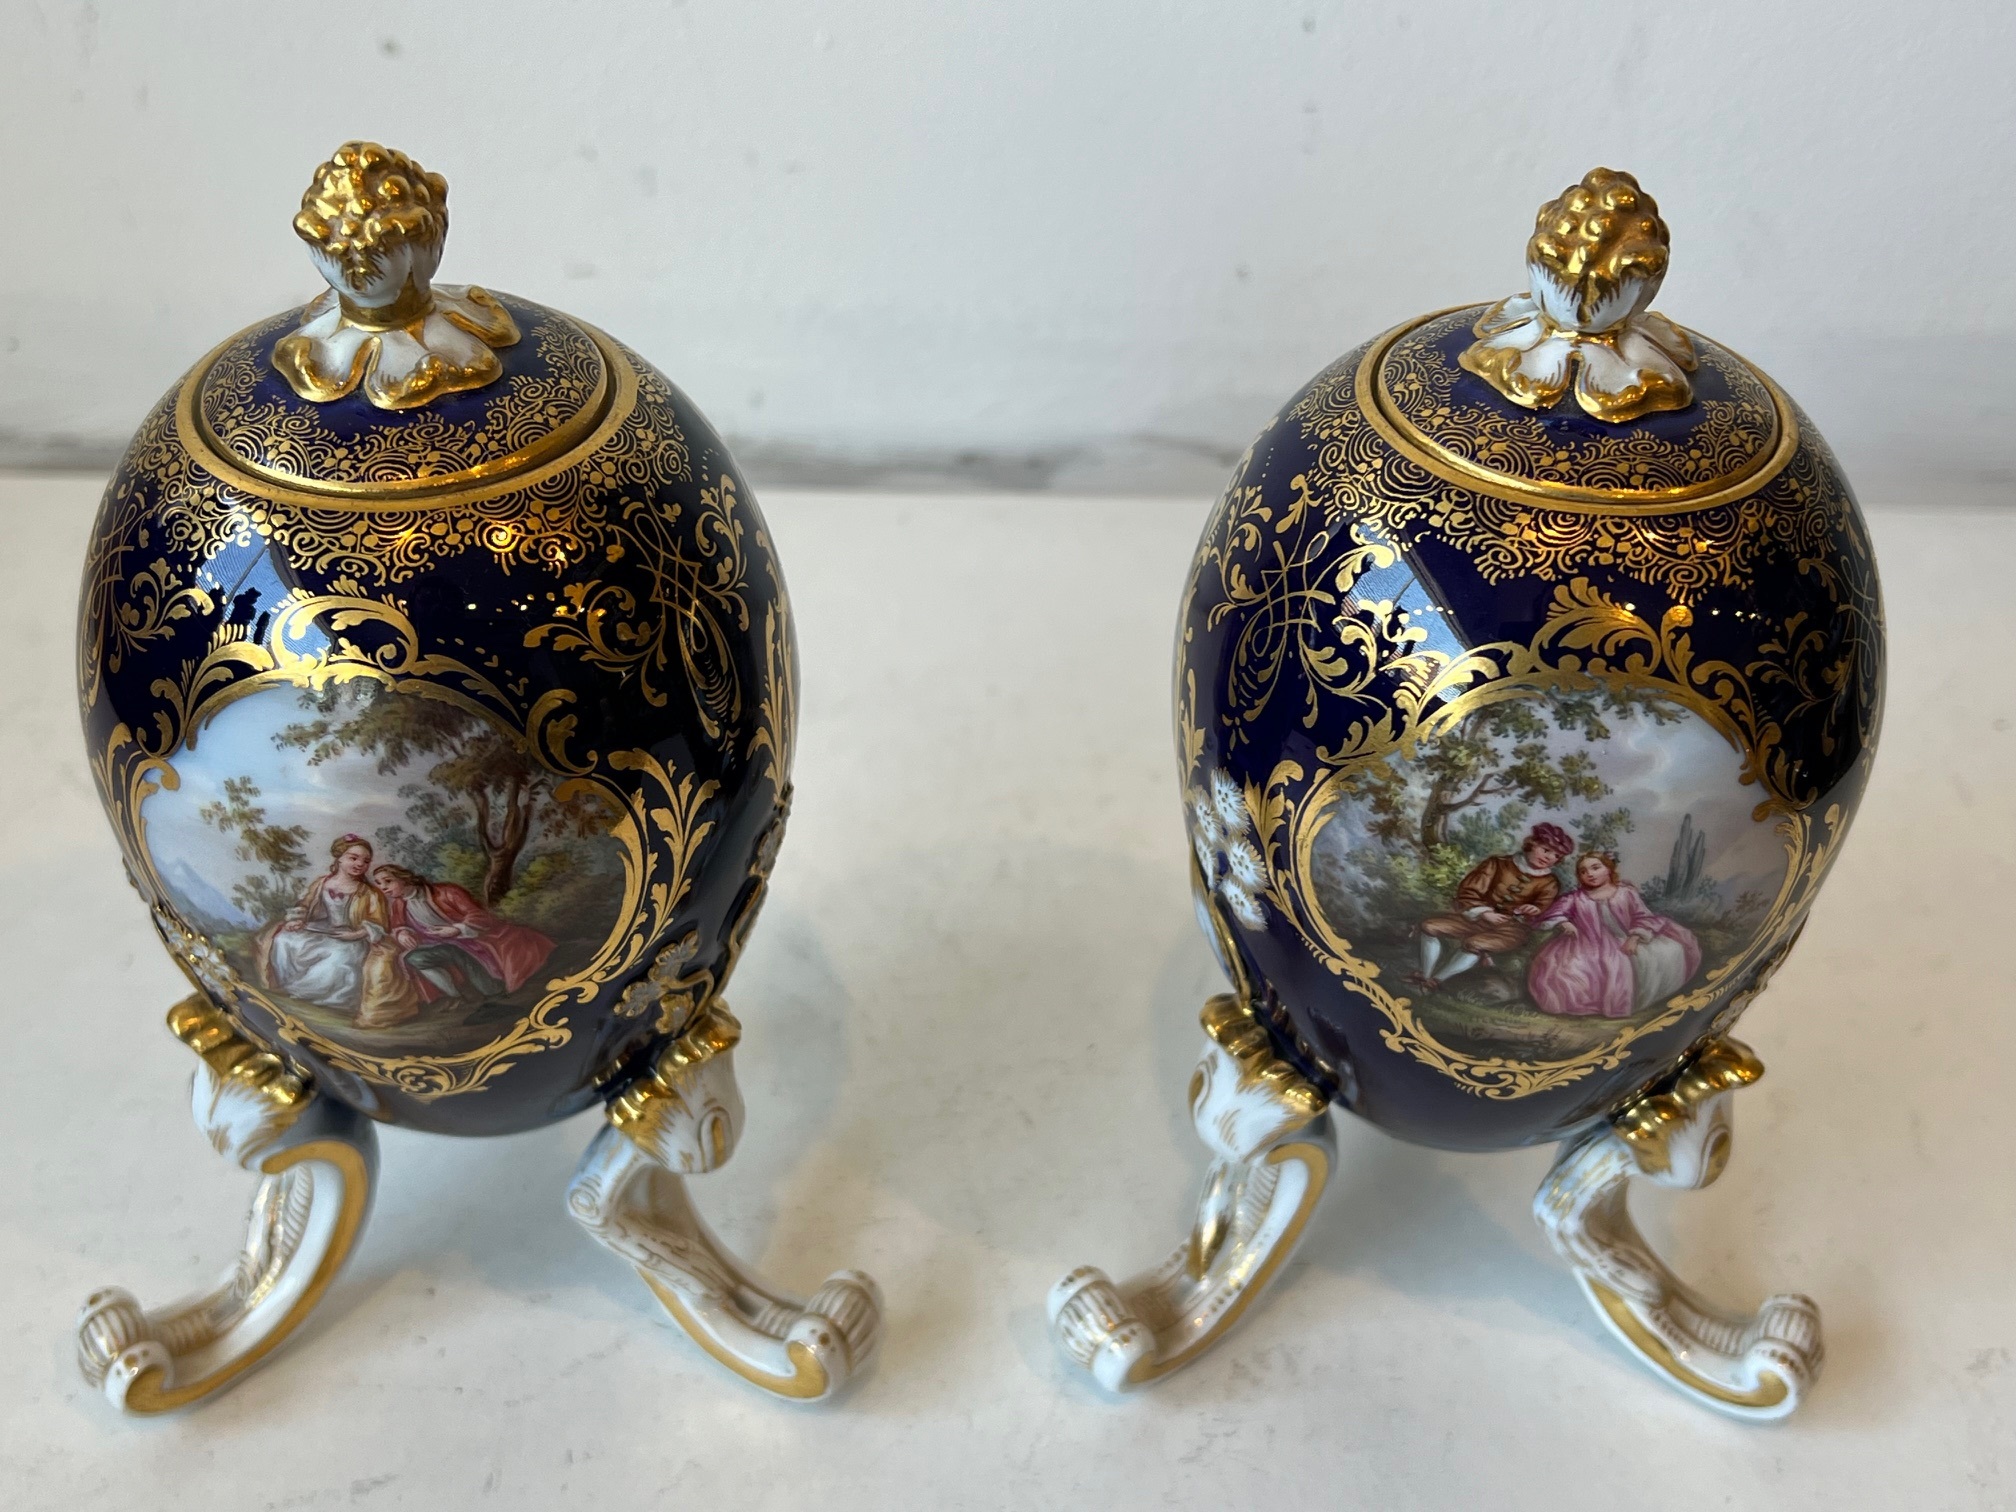 MEISSEN: A PAIR OF LATE 19TH / EARLY 20TH CENTURY PORCELAIN EGG SHAPED TEA CADDIES - Image 11 of 16